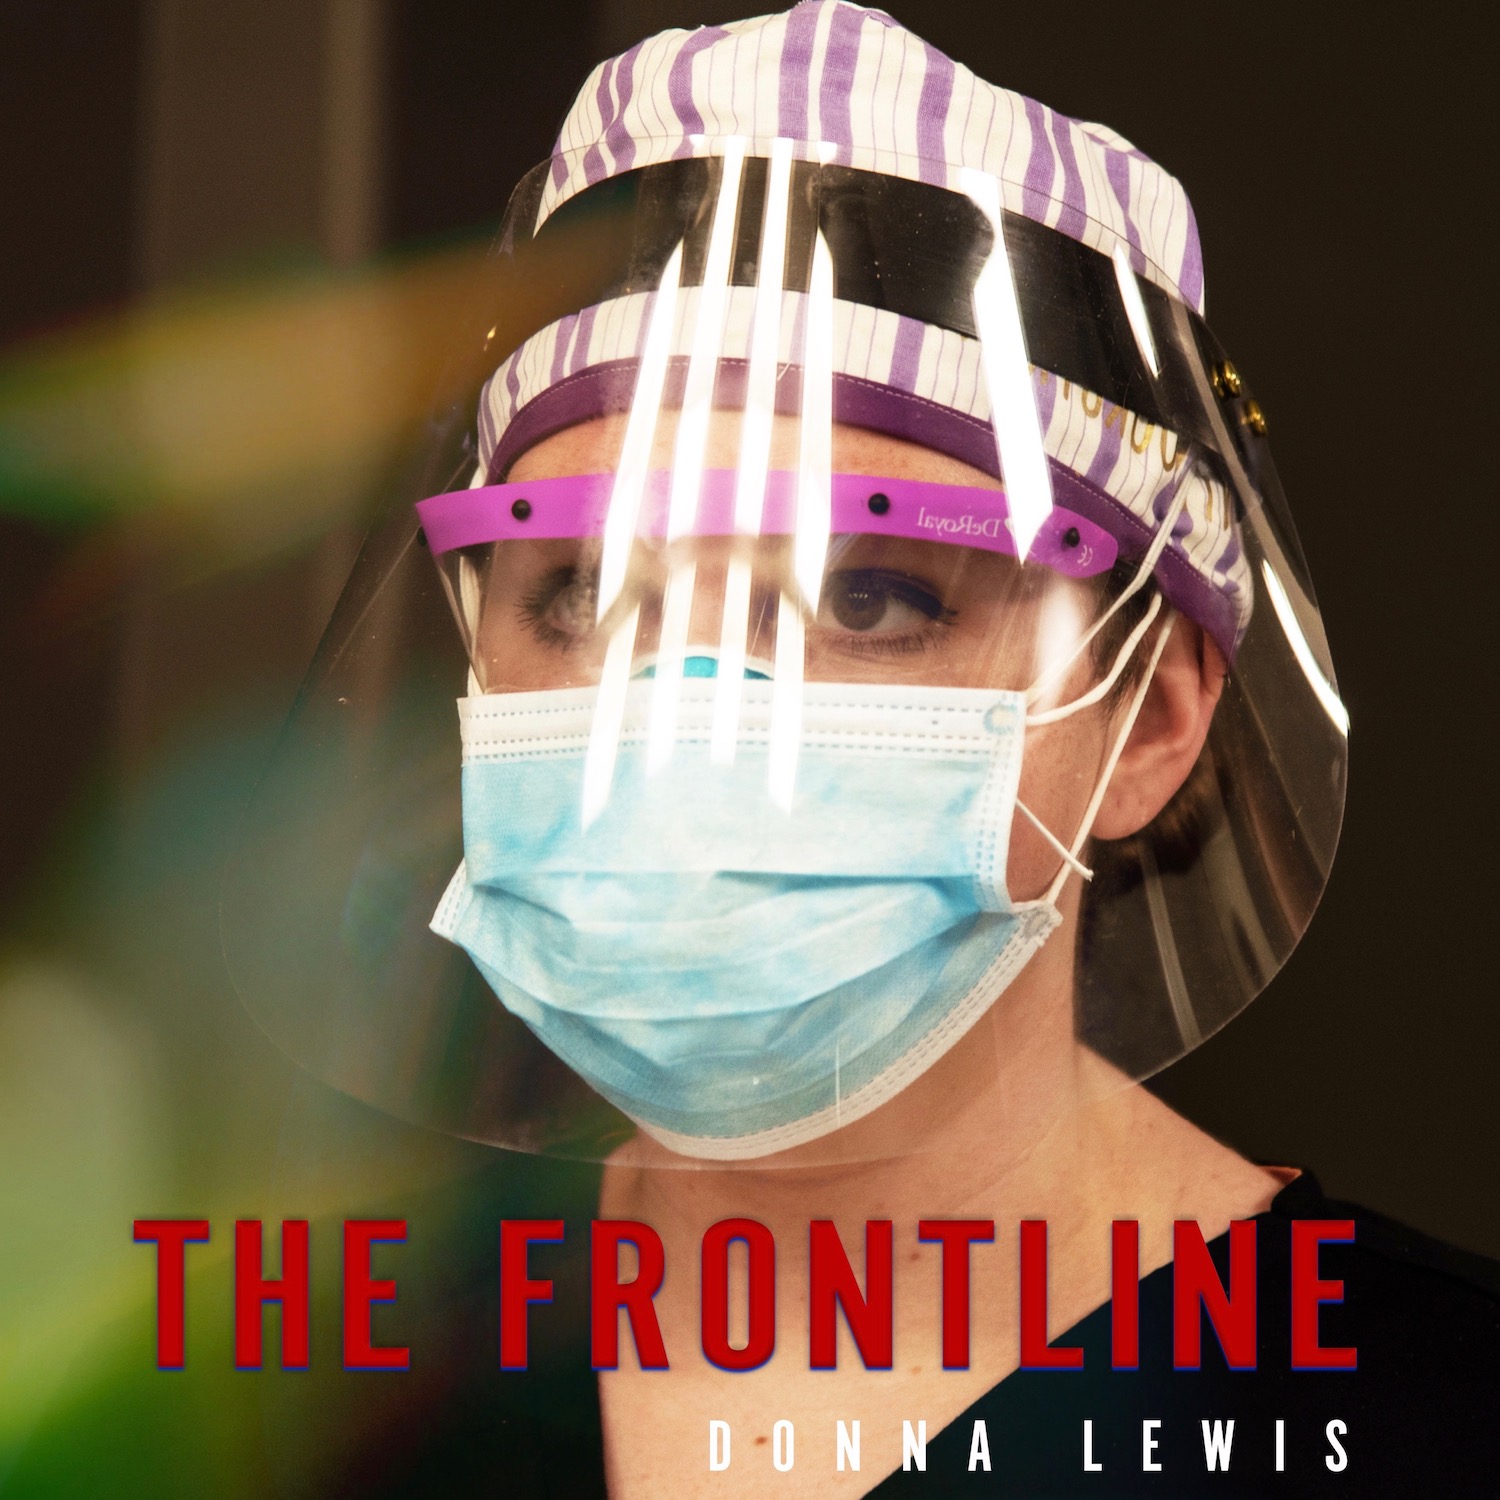 Donna Lewis – The Frontline